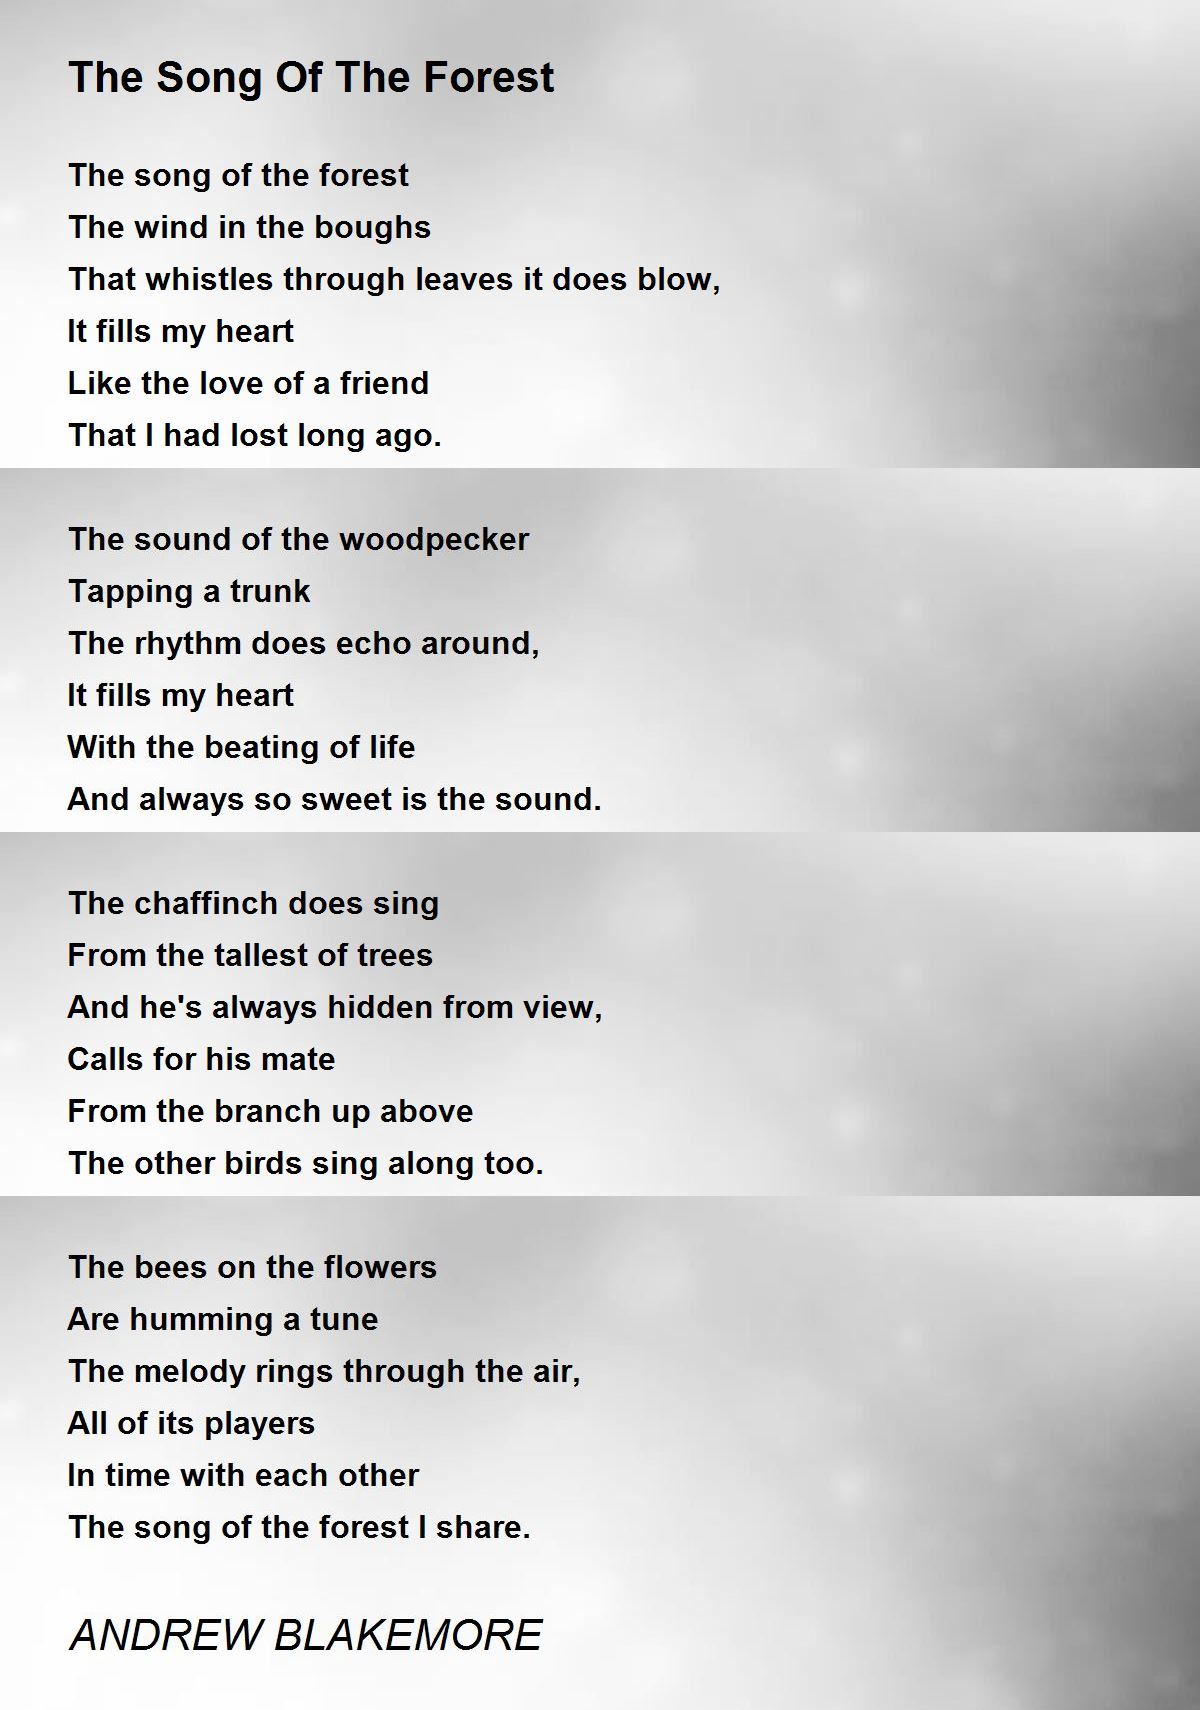 The Song Of The Forest - The Song Of The Forest Poem by ANDREW BLAKEMORE